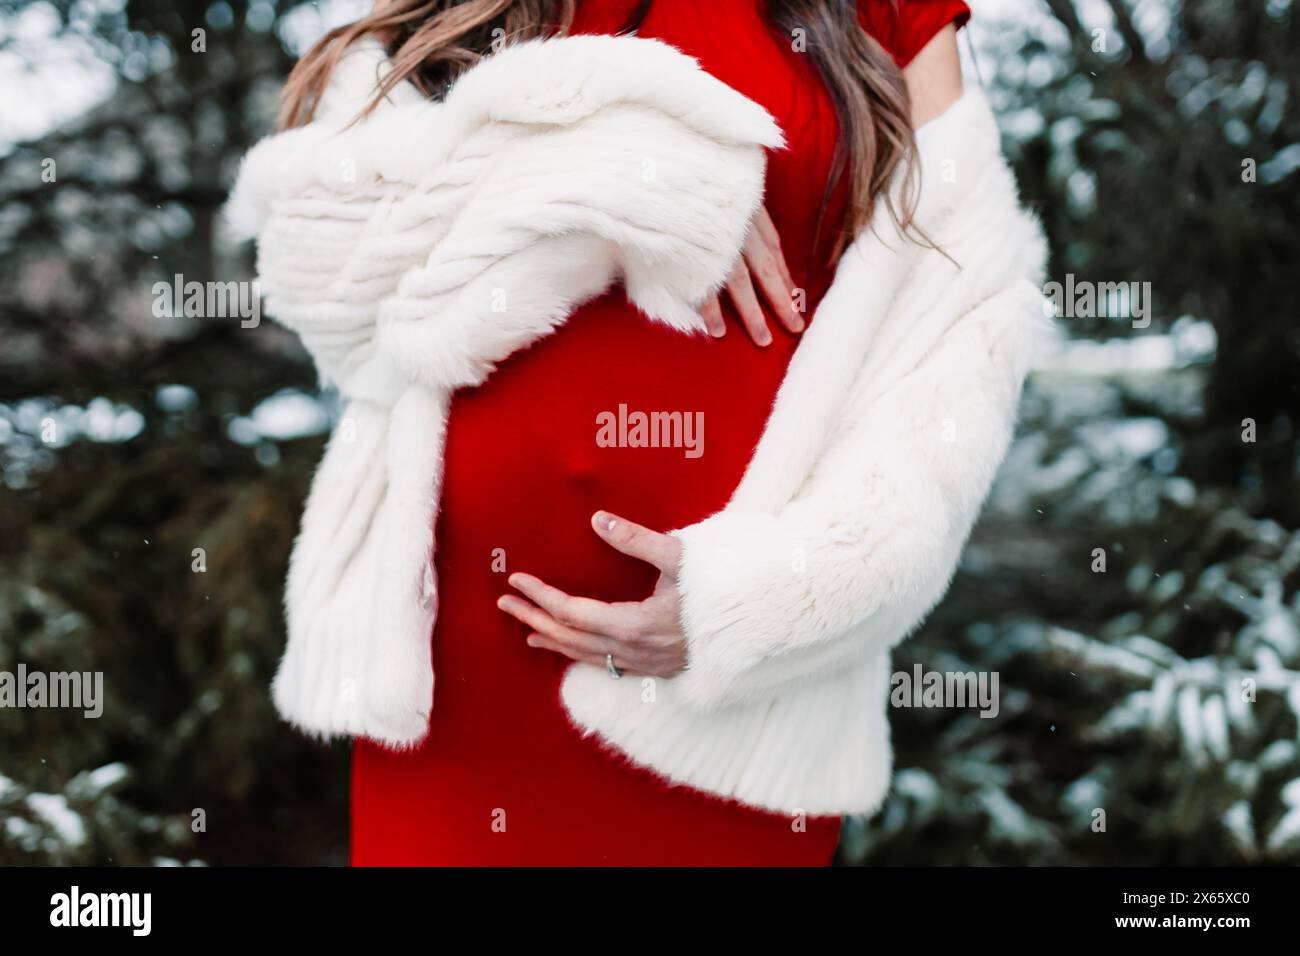 Pregnant woman in red dress with white coat in snow Stock Photo